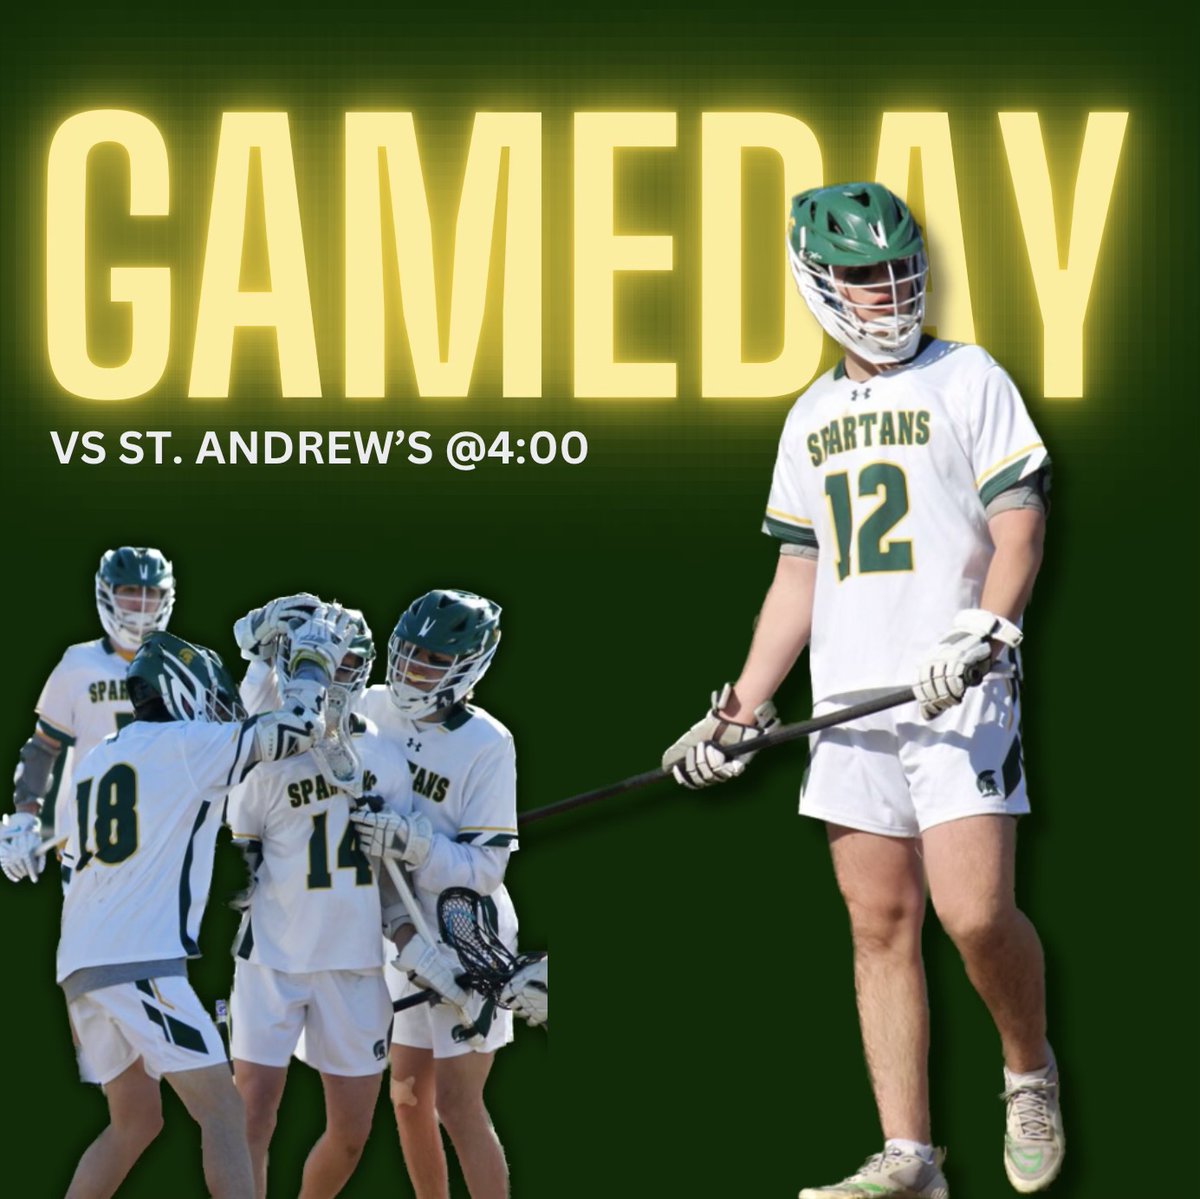 Today our @saintmarkshs Boys Lacrosse team faces off against St. Andrew’s away at 4:00 pm! Let’s Go!!! #saintmarkshs #spartanstrong #saintmarkslacrosse